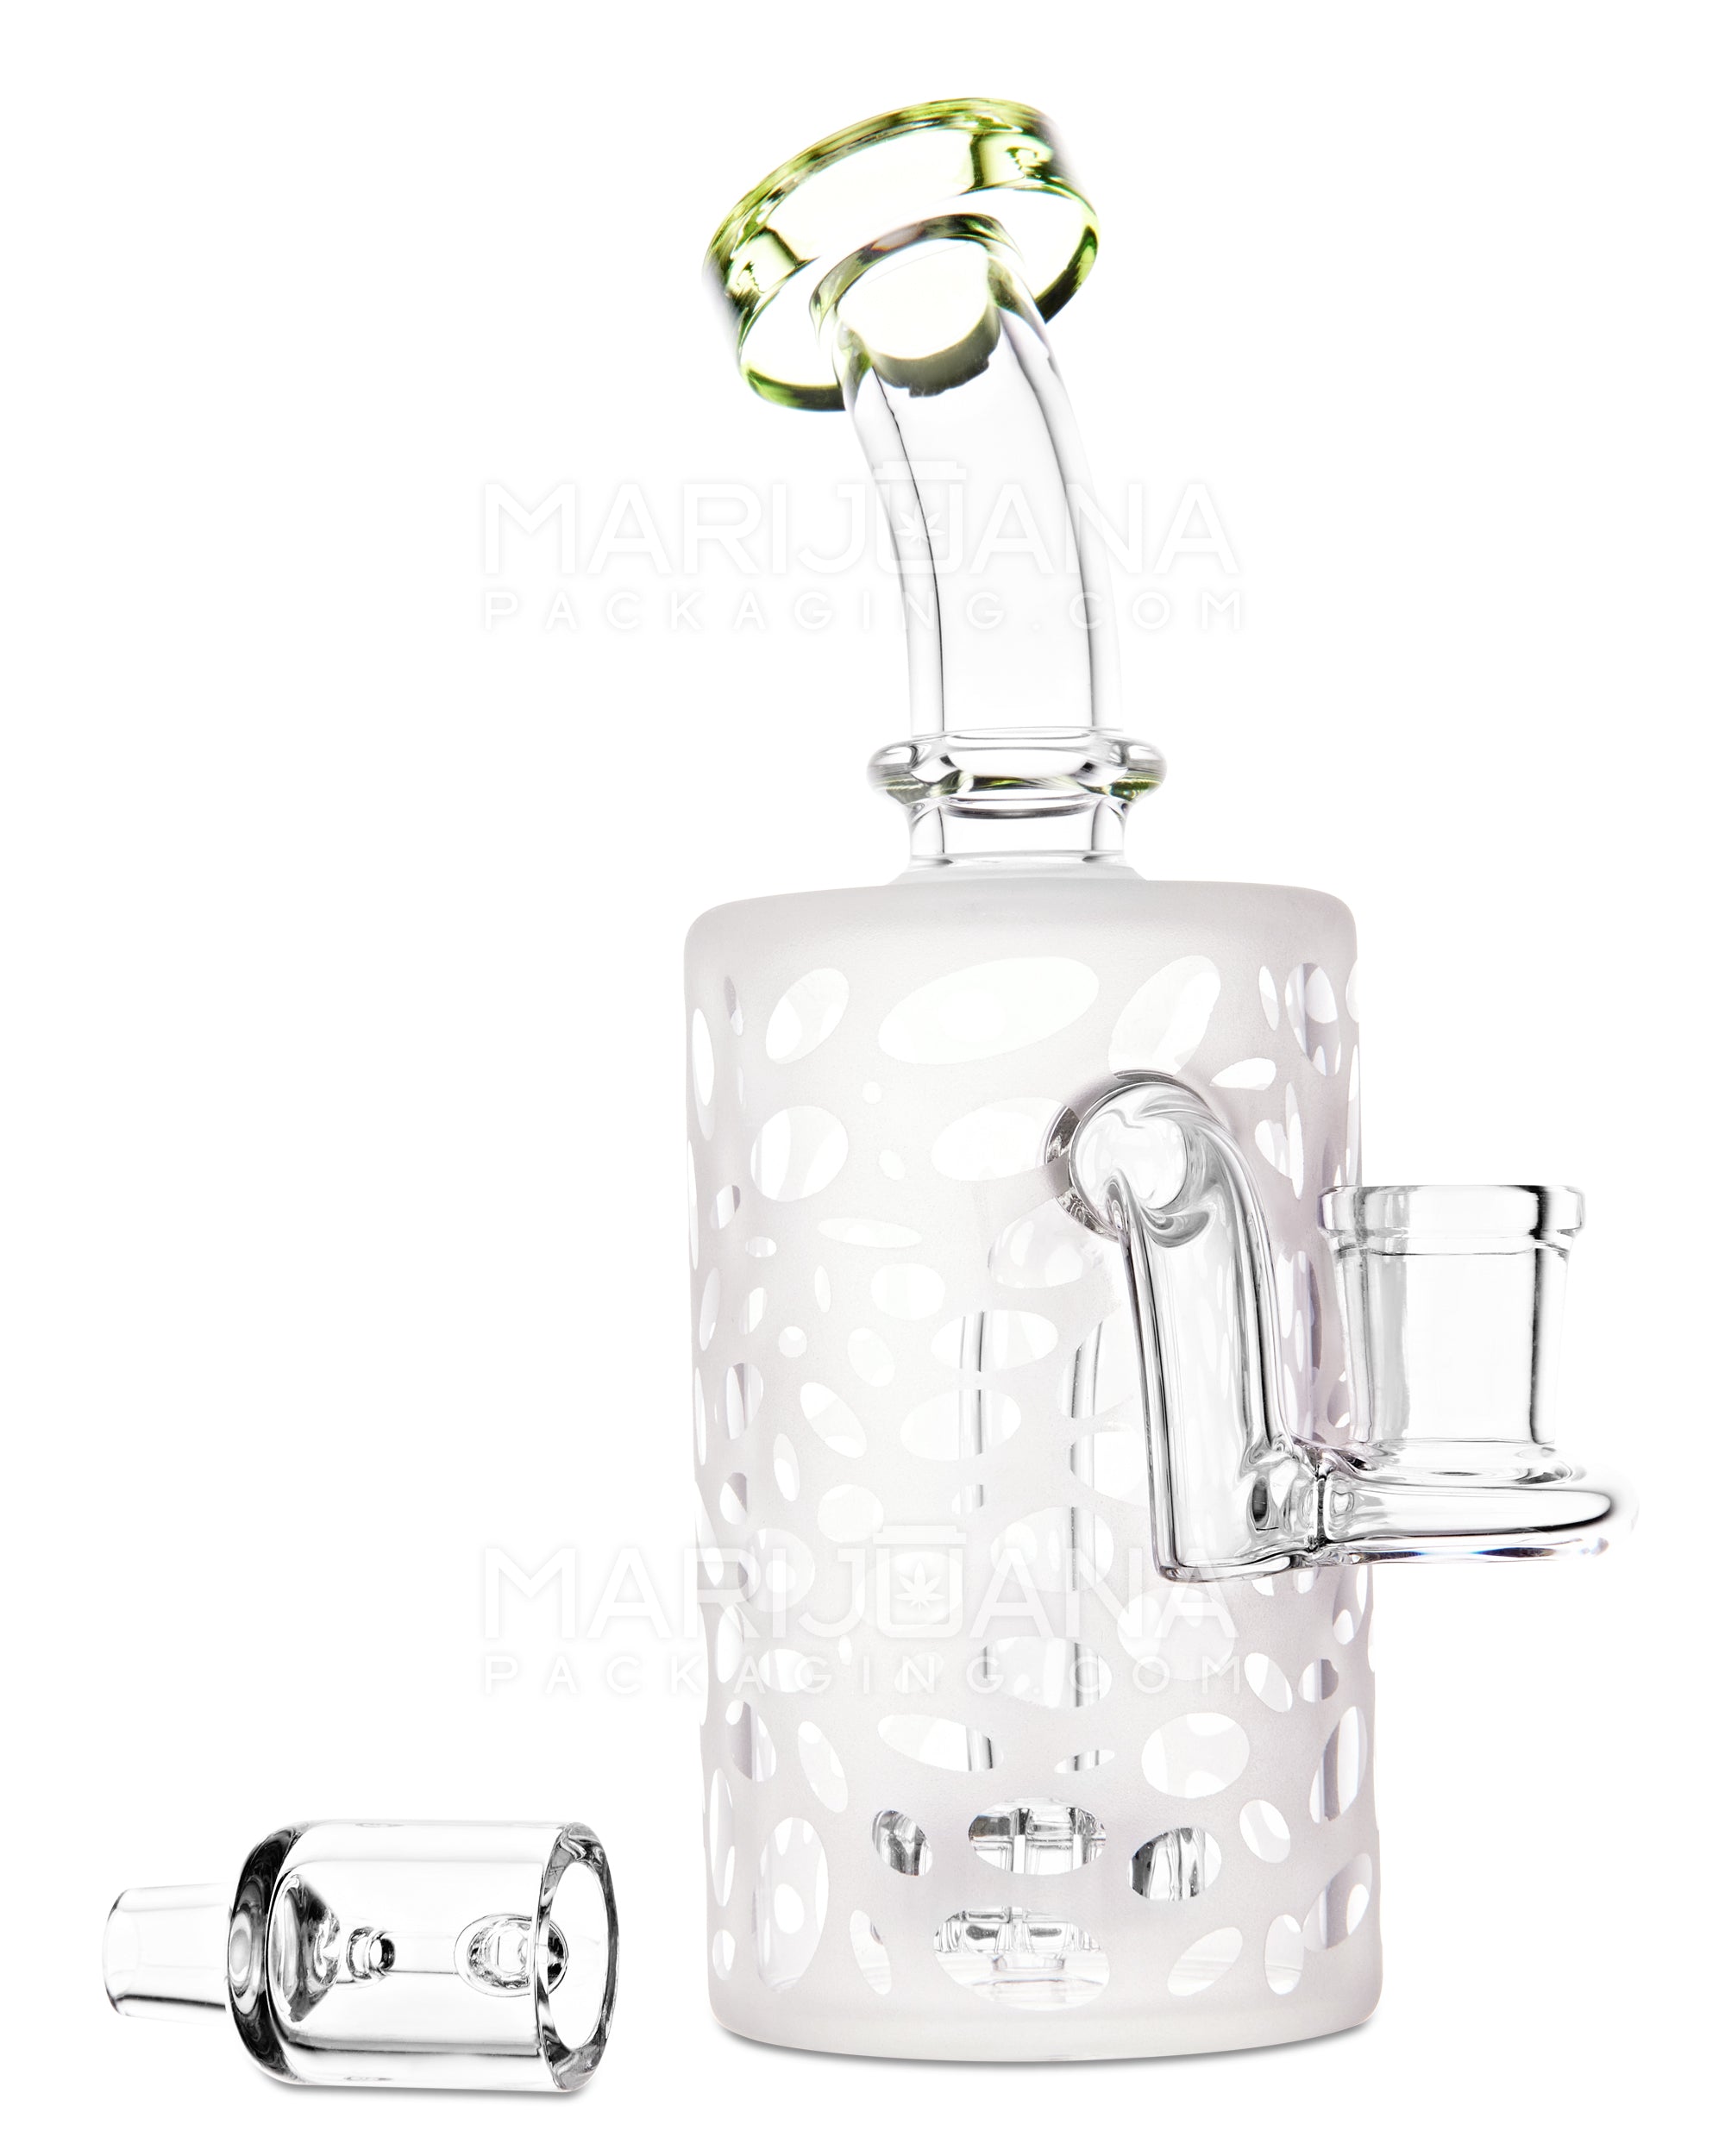 Bent Neck Showerhead Perc Sandblasted Glass Dab Rig w/ Thick Base | 6in Tall - 14mm Banger - Green - 3